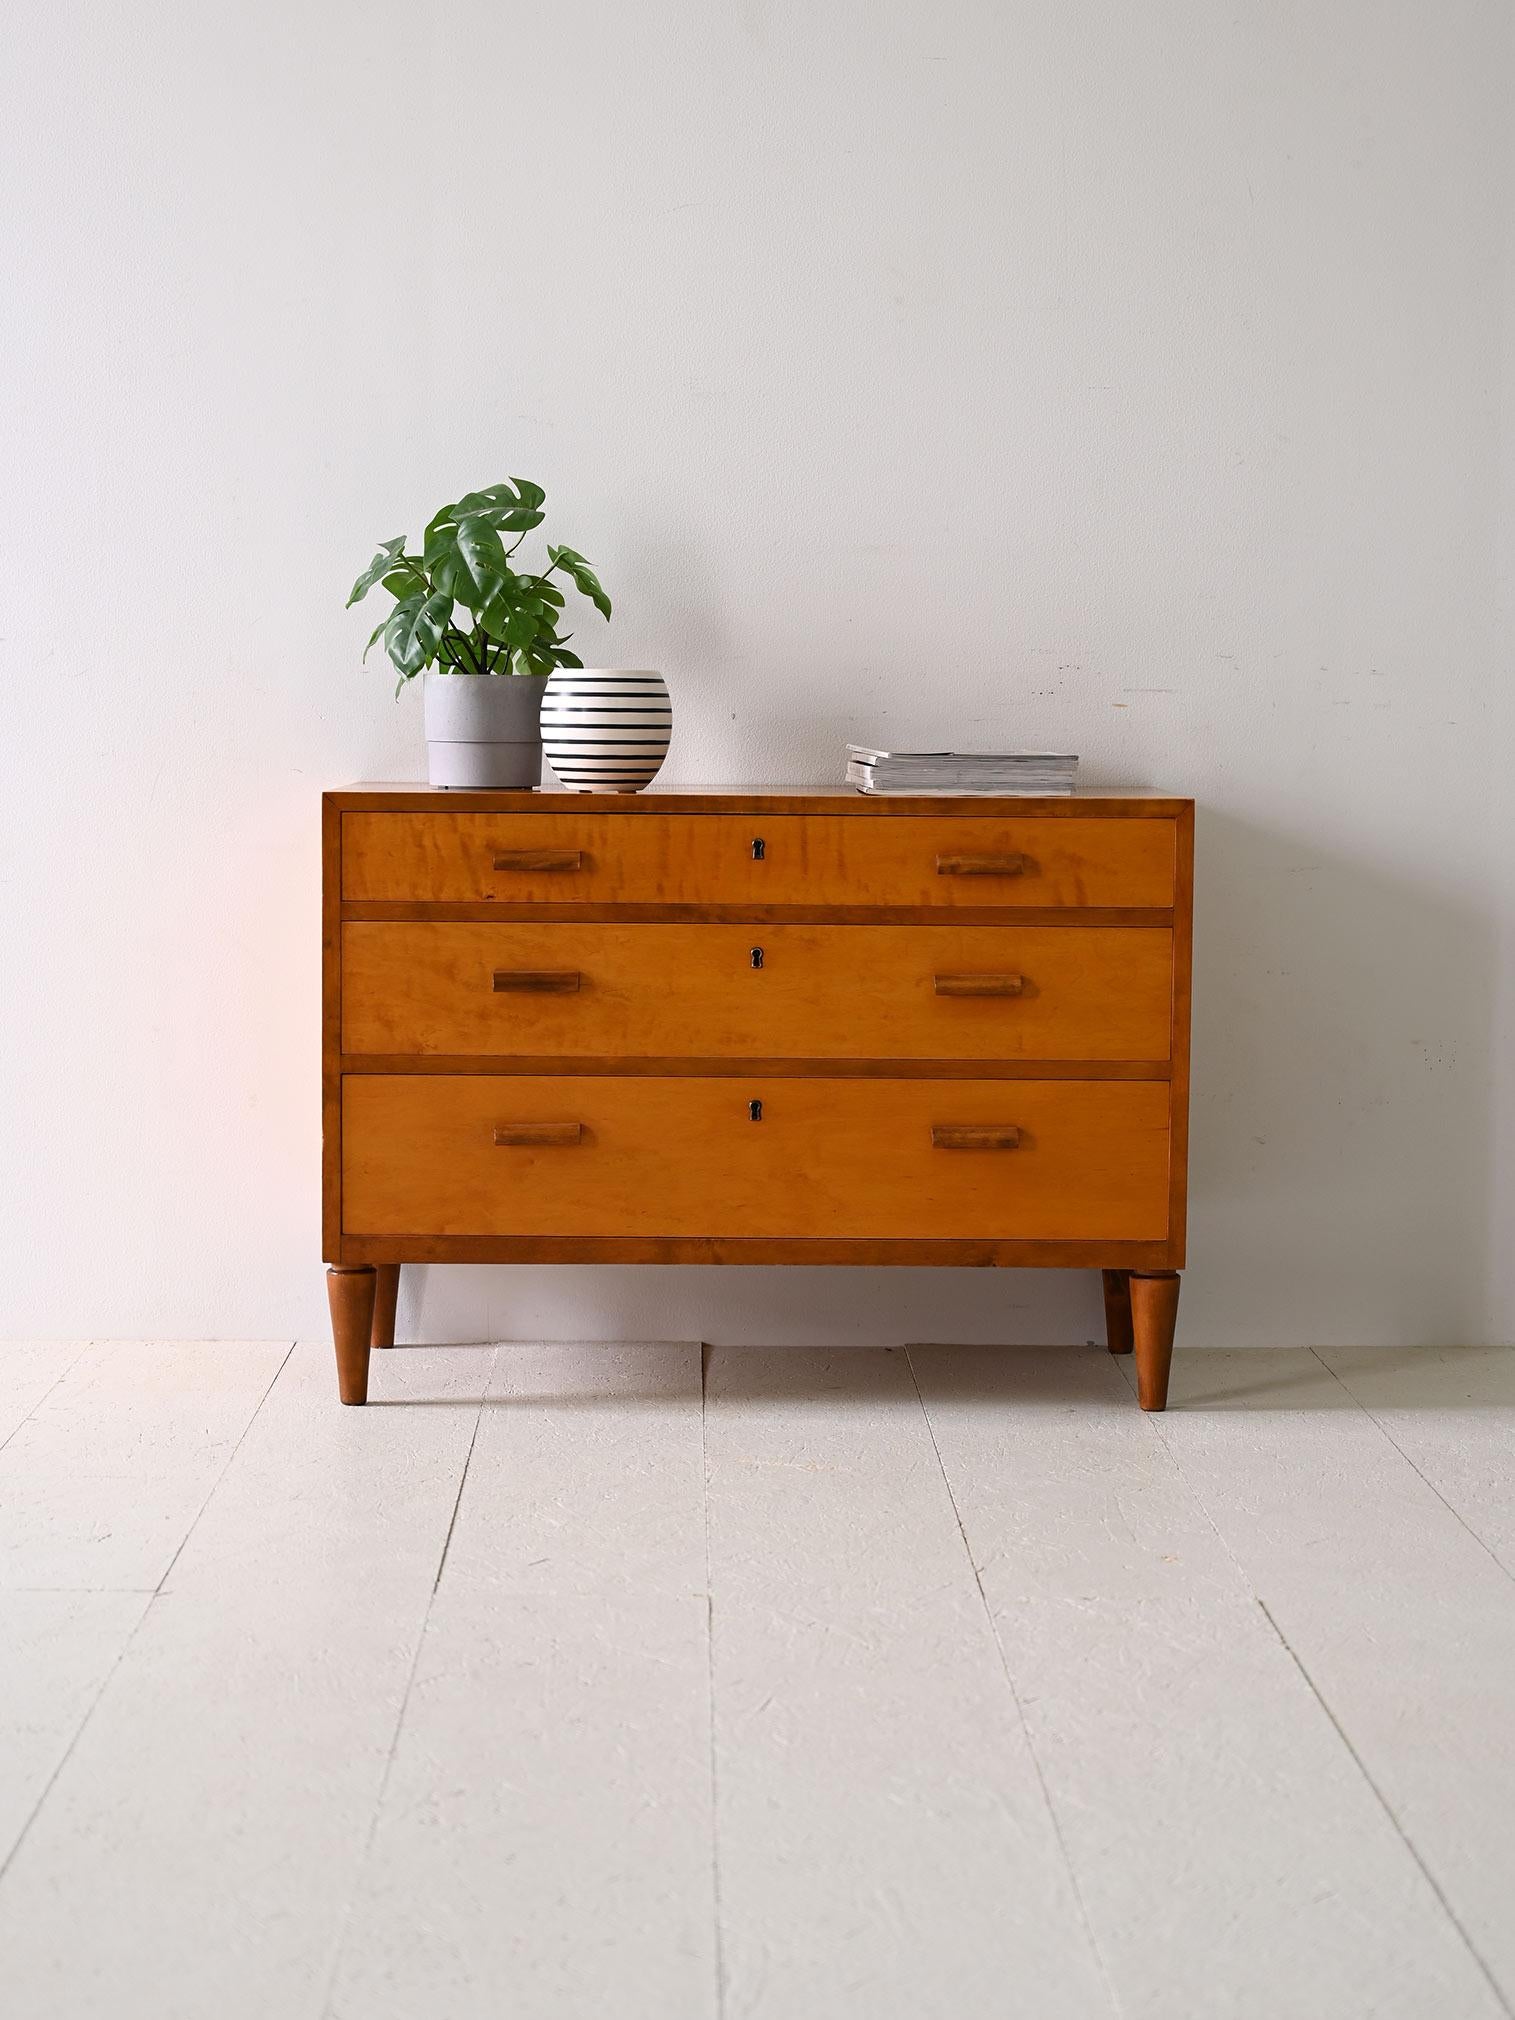 Scandinavian Deco chest of drawers produced in the 1940s.

The square shape and rectangular carved wooden handles lend a unique character to this original vintage piece of furniture.

All three drawers are lockable.

Good condition. A conservative